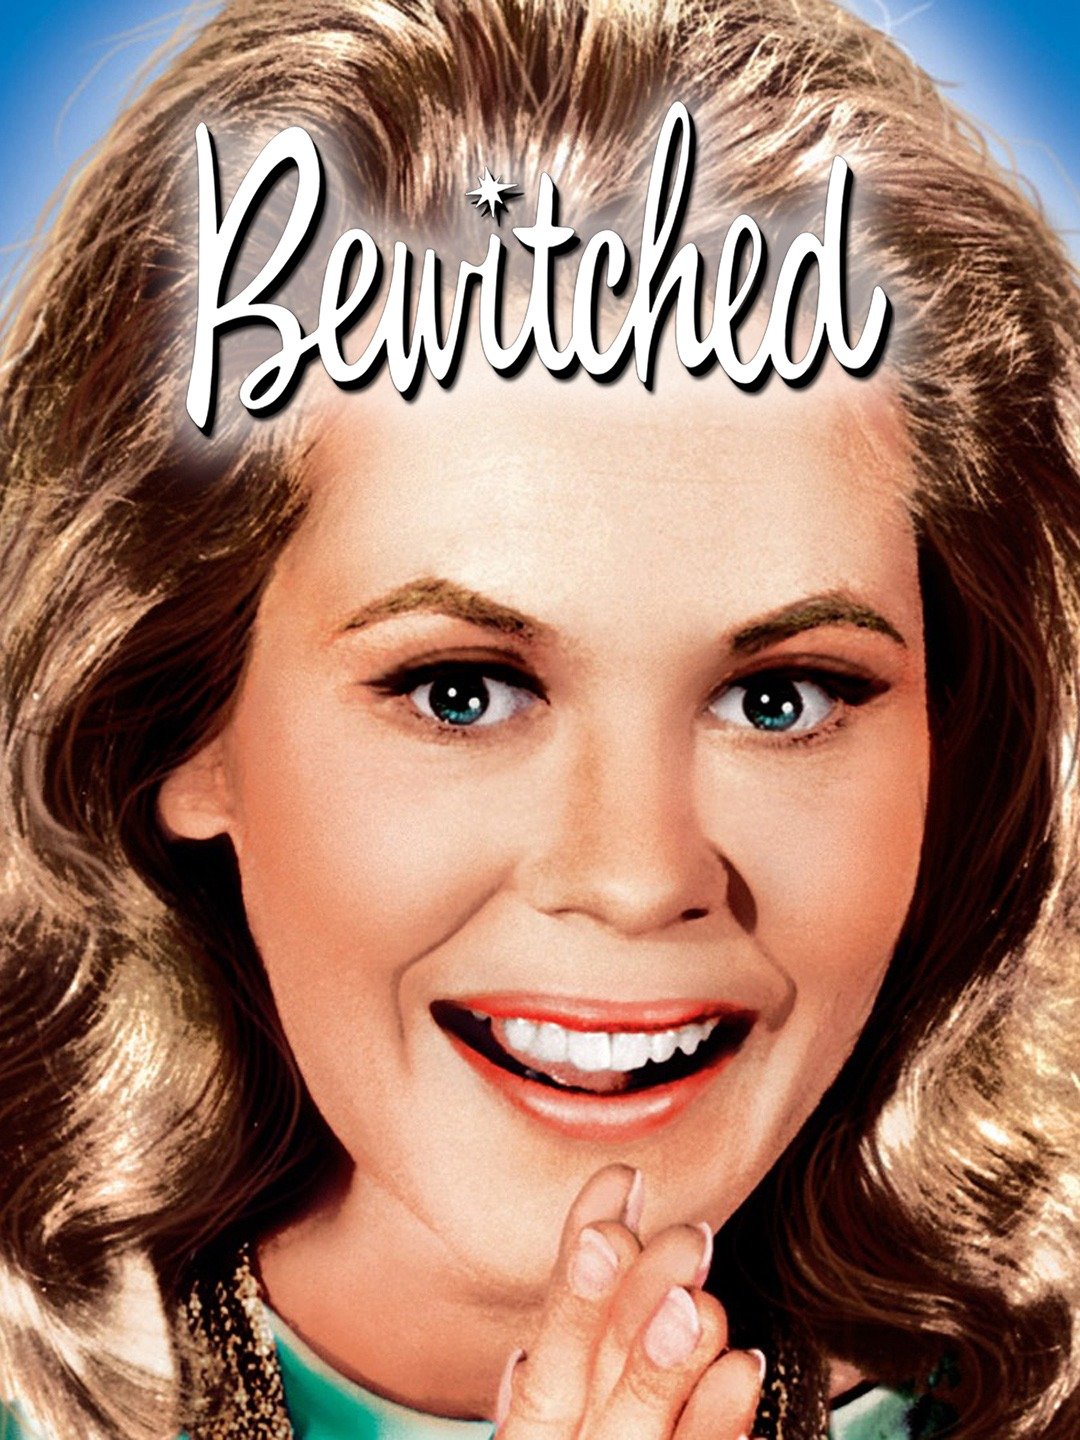 Bewitched image